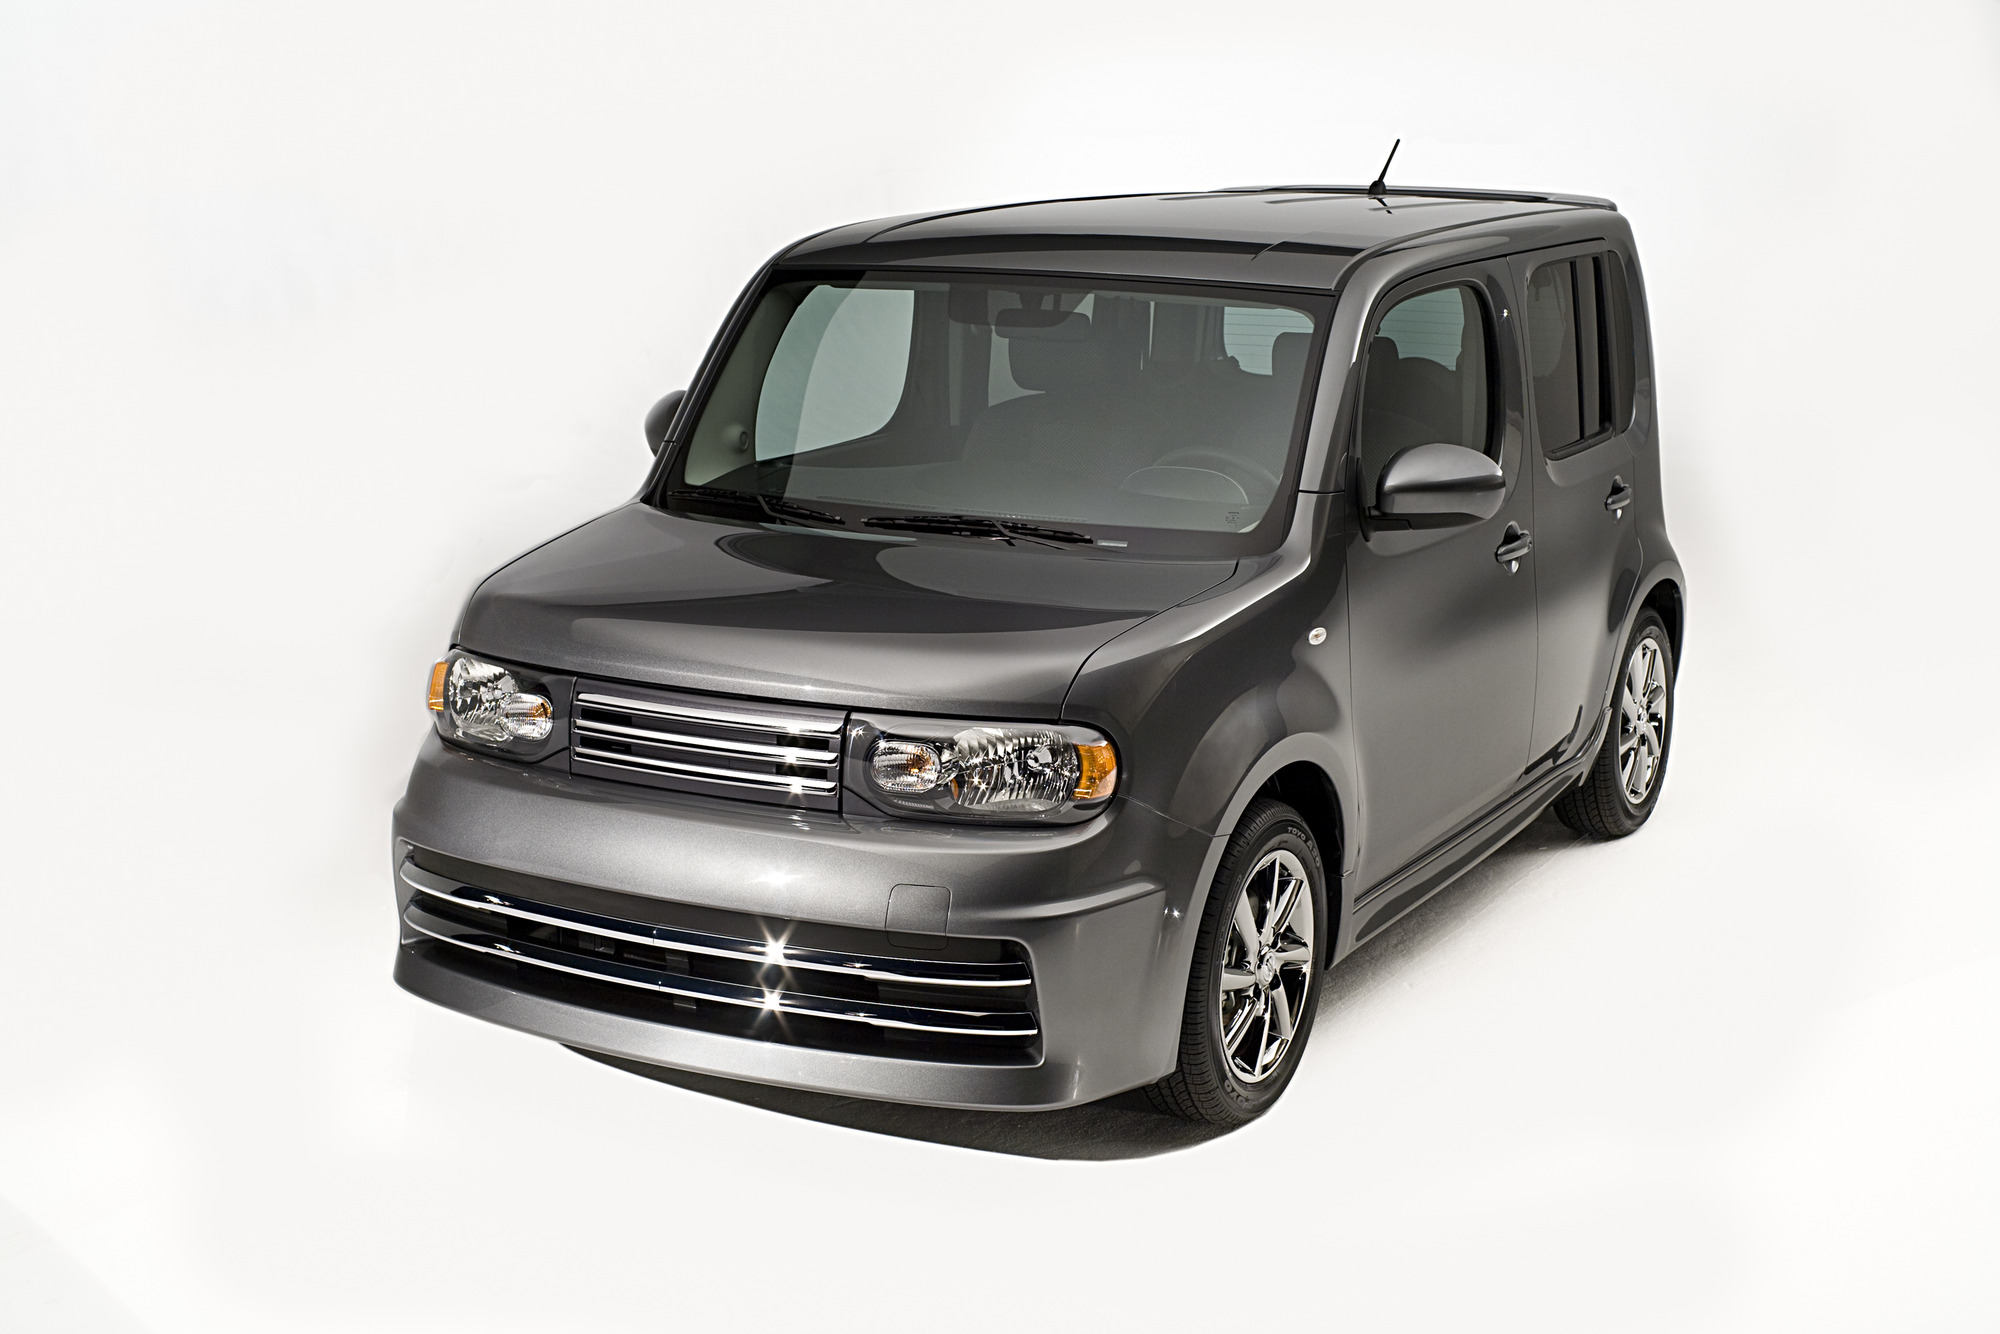 2011 Nissan Cube Review Ratings Specs Prices And Photos